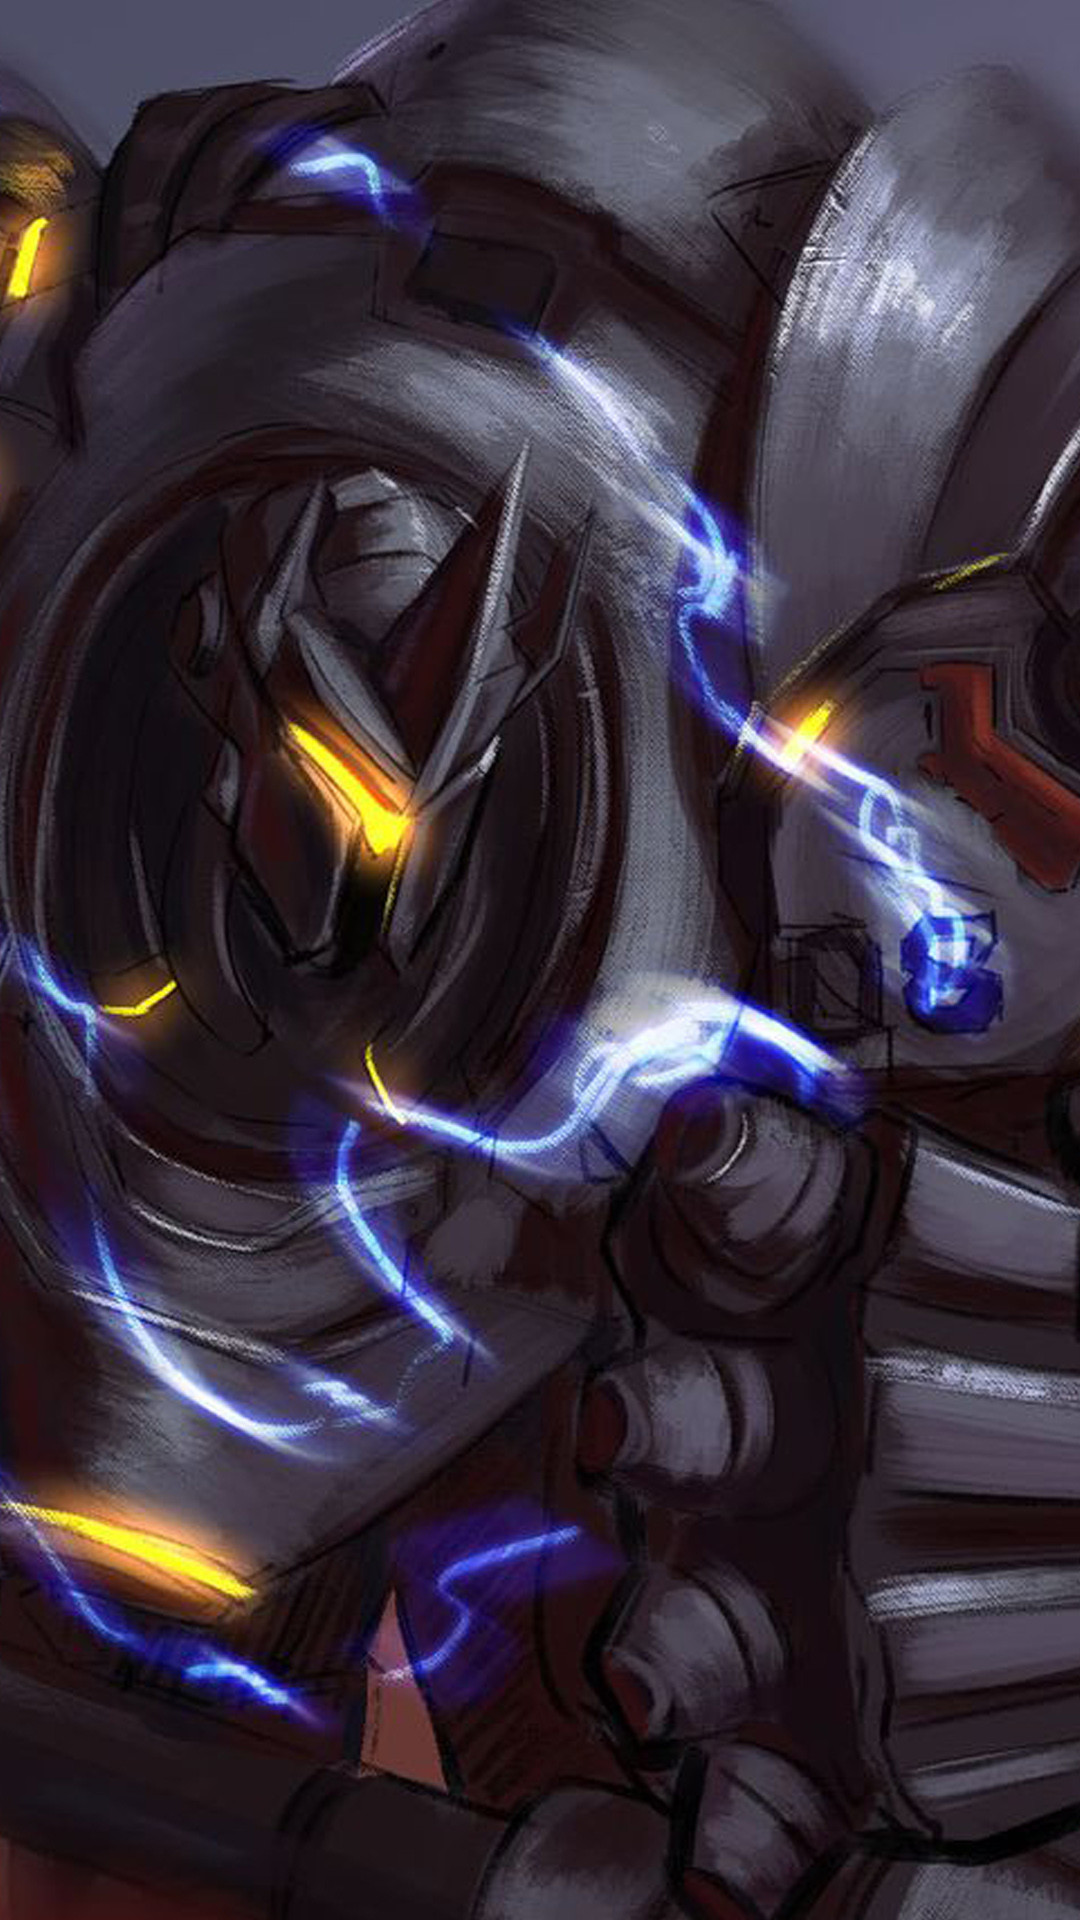 overwatch iphone wallpaper,fictional character,cg artwork,illustration,games,drawing